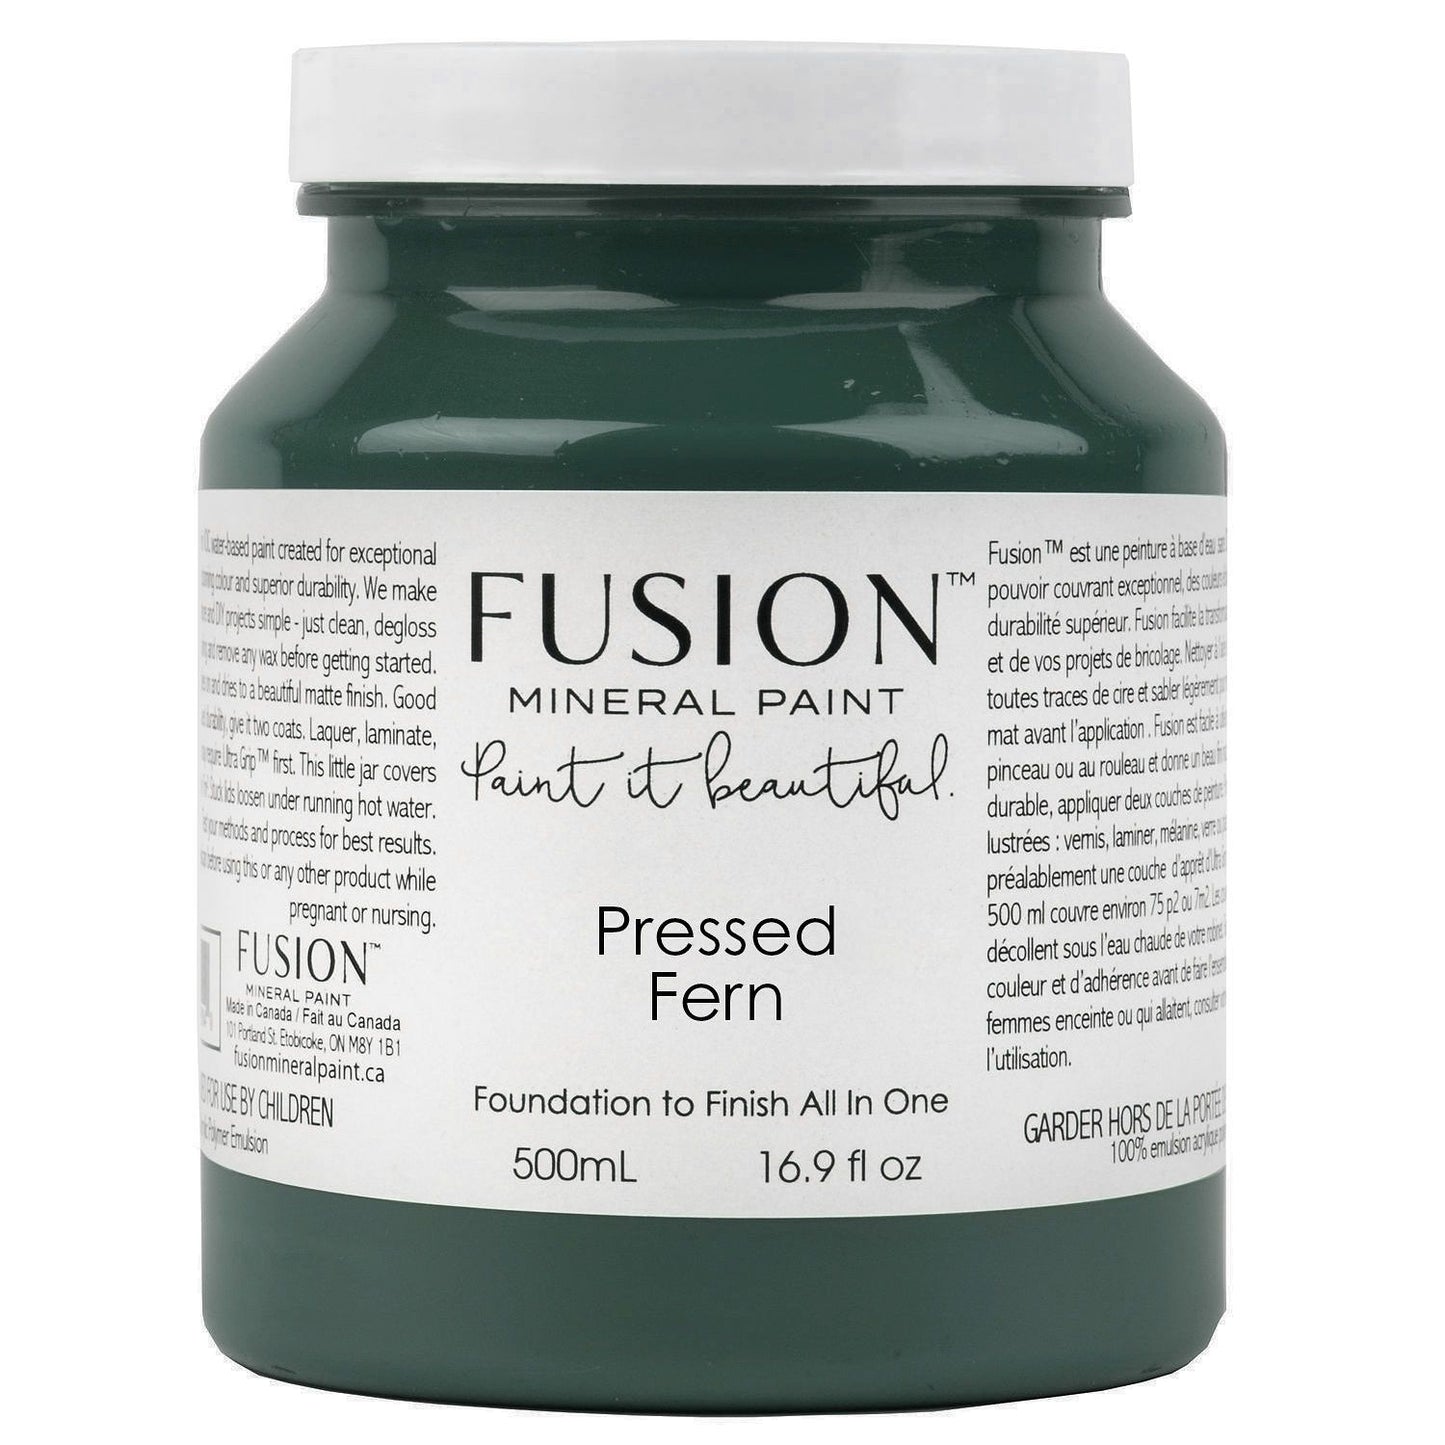 Pressed Fern - Fusion Mineral Paint Paint > Fusion Mineral Paint > Furniture Paint 500ml